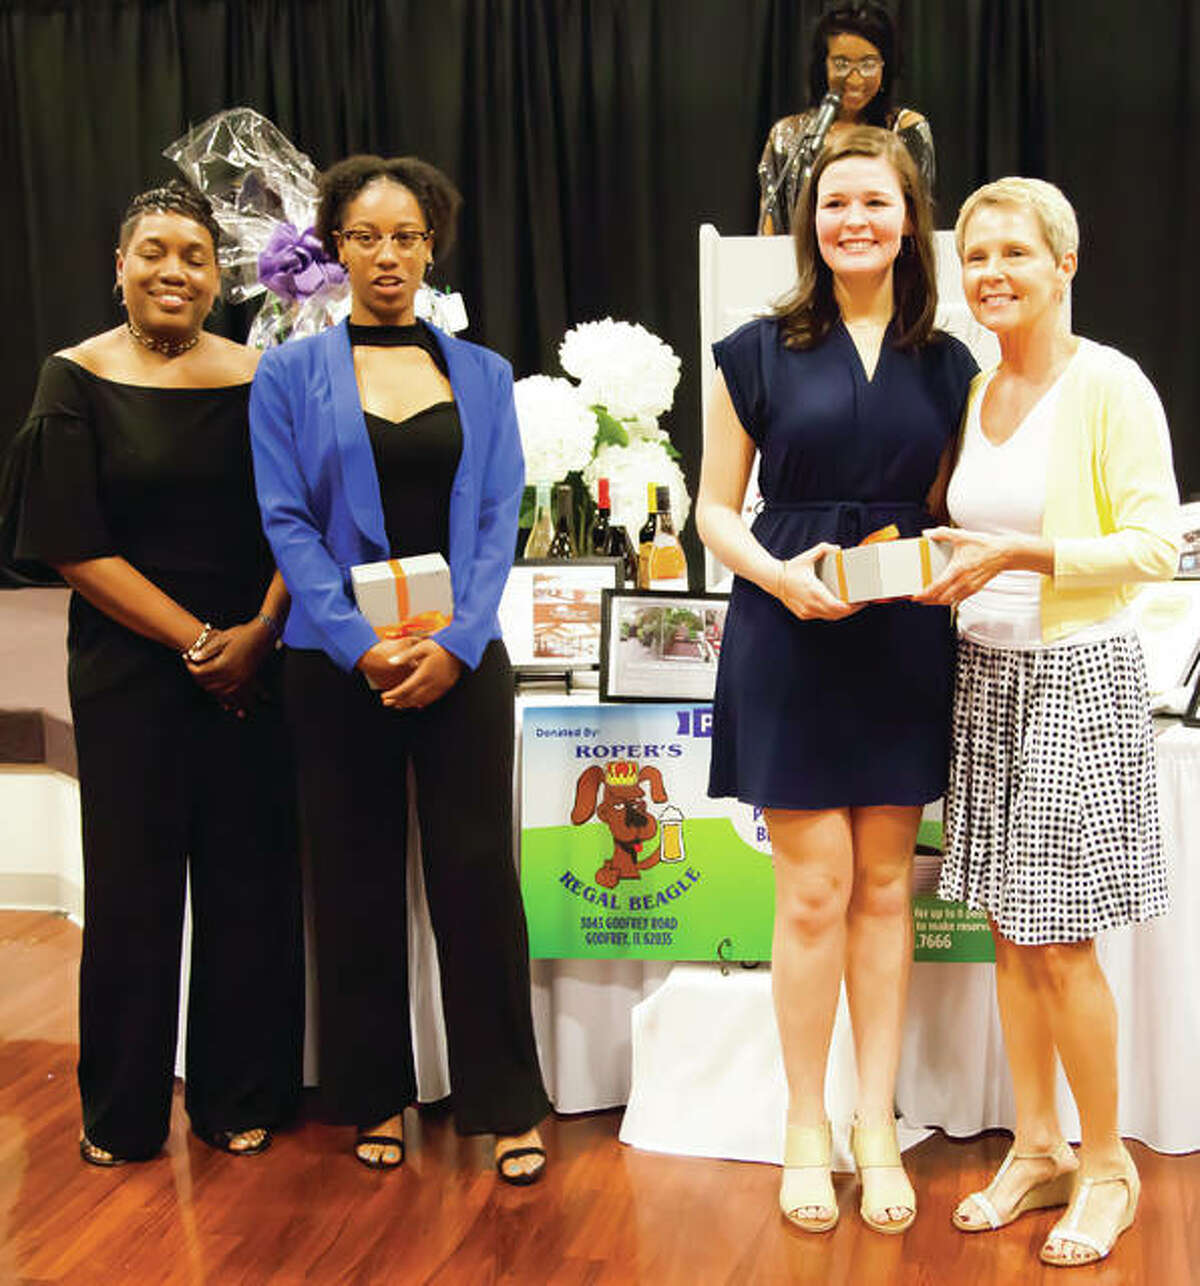 The 2019 Josephine Marley Beckwith Future Leader Scholars, Ashlynn Green and Regan Windau, were also honored during the YWCA’s 29h Annual Women of Distinction Award Dinner held at the Lewis and Clark Community College Campus. Pictured (left to right) are YWCA Board Member Lisa Brown, Alton High School Senior Ashlynn Green, Edwardsville High School Senior Regan Windau, and YWCA Board Member Theresa Franklin. Raynah Ray (background) was the EMCEE for Thursday’s event.